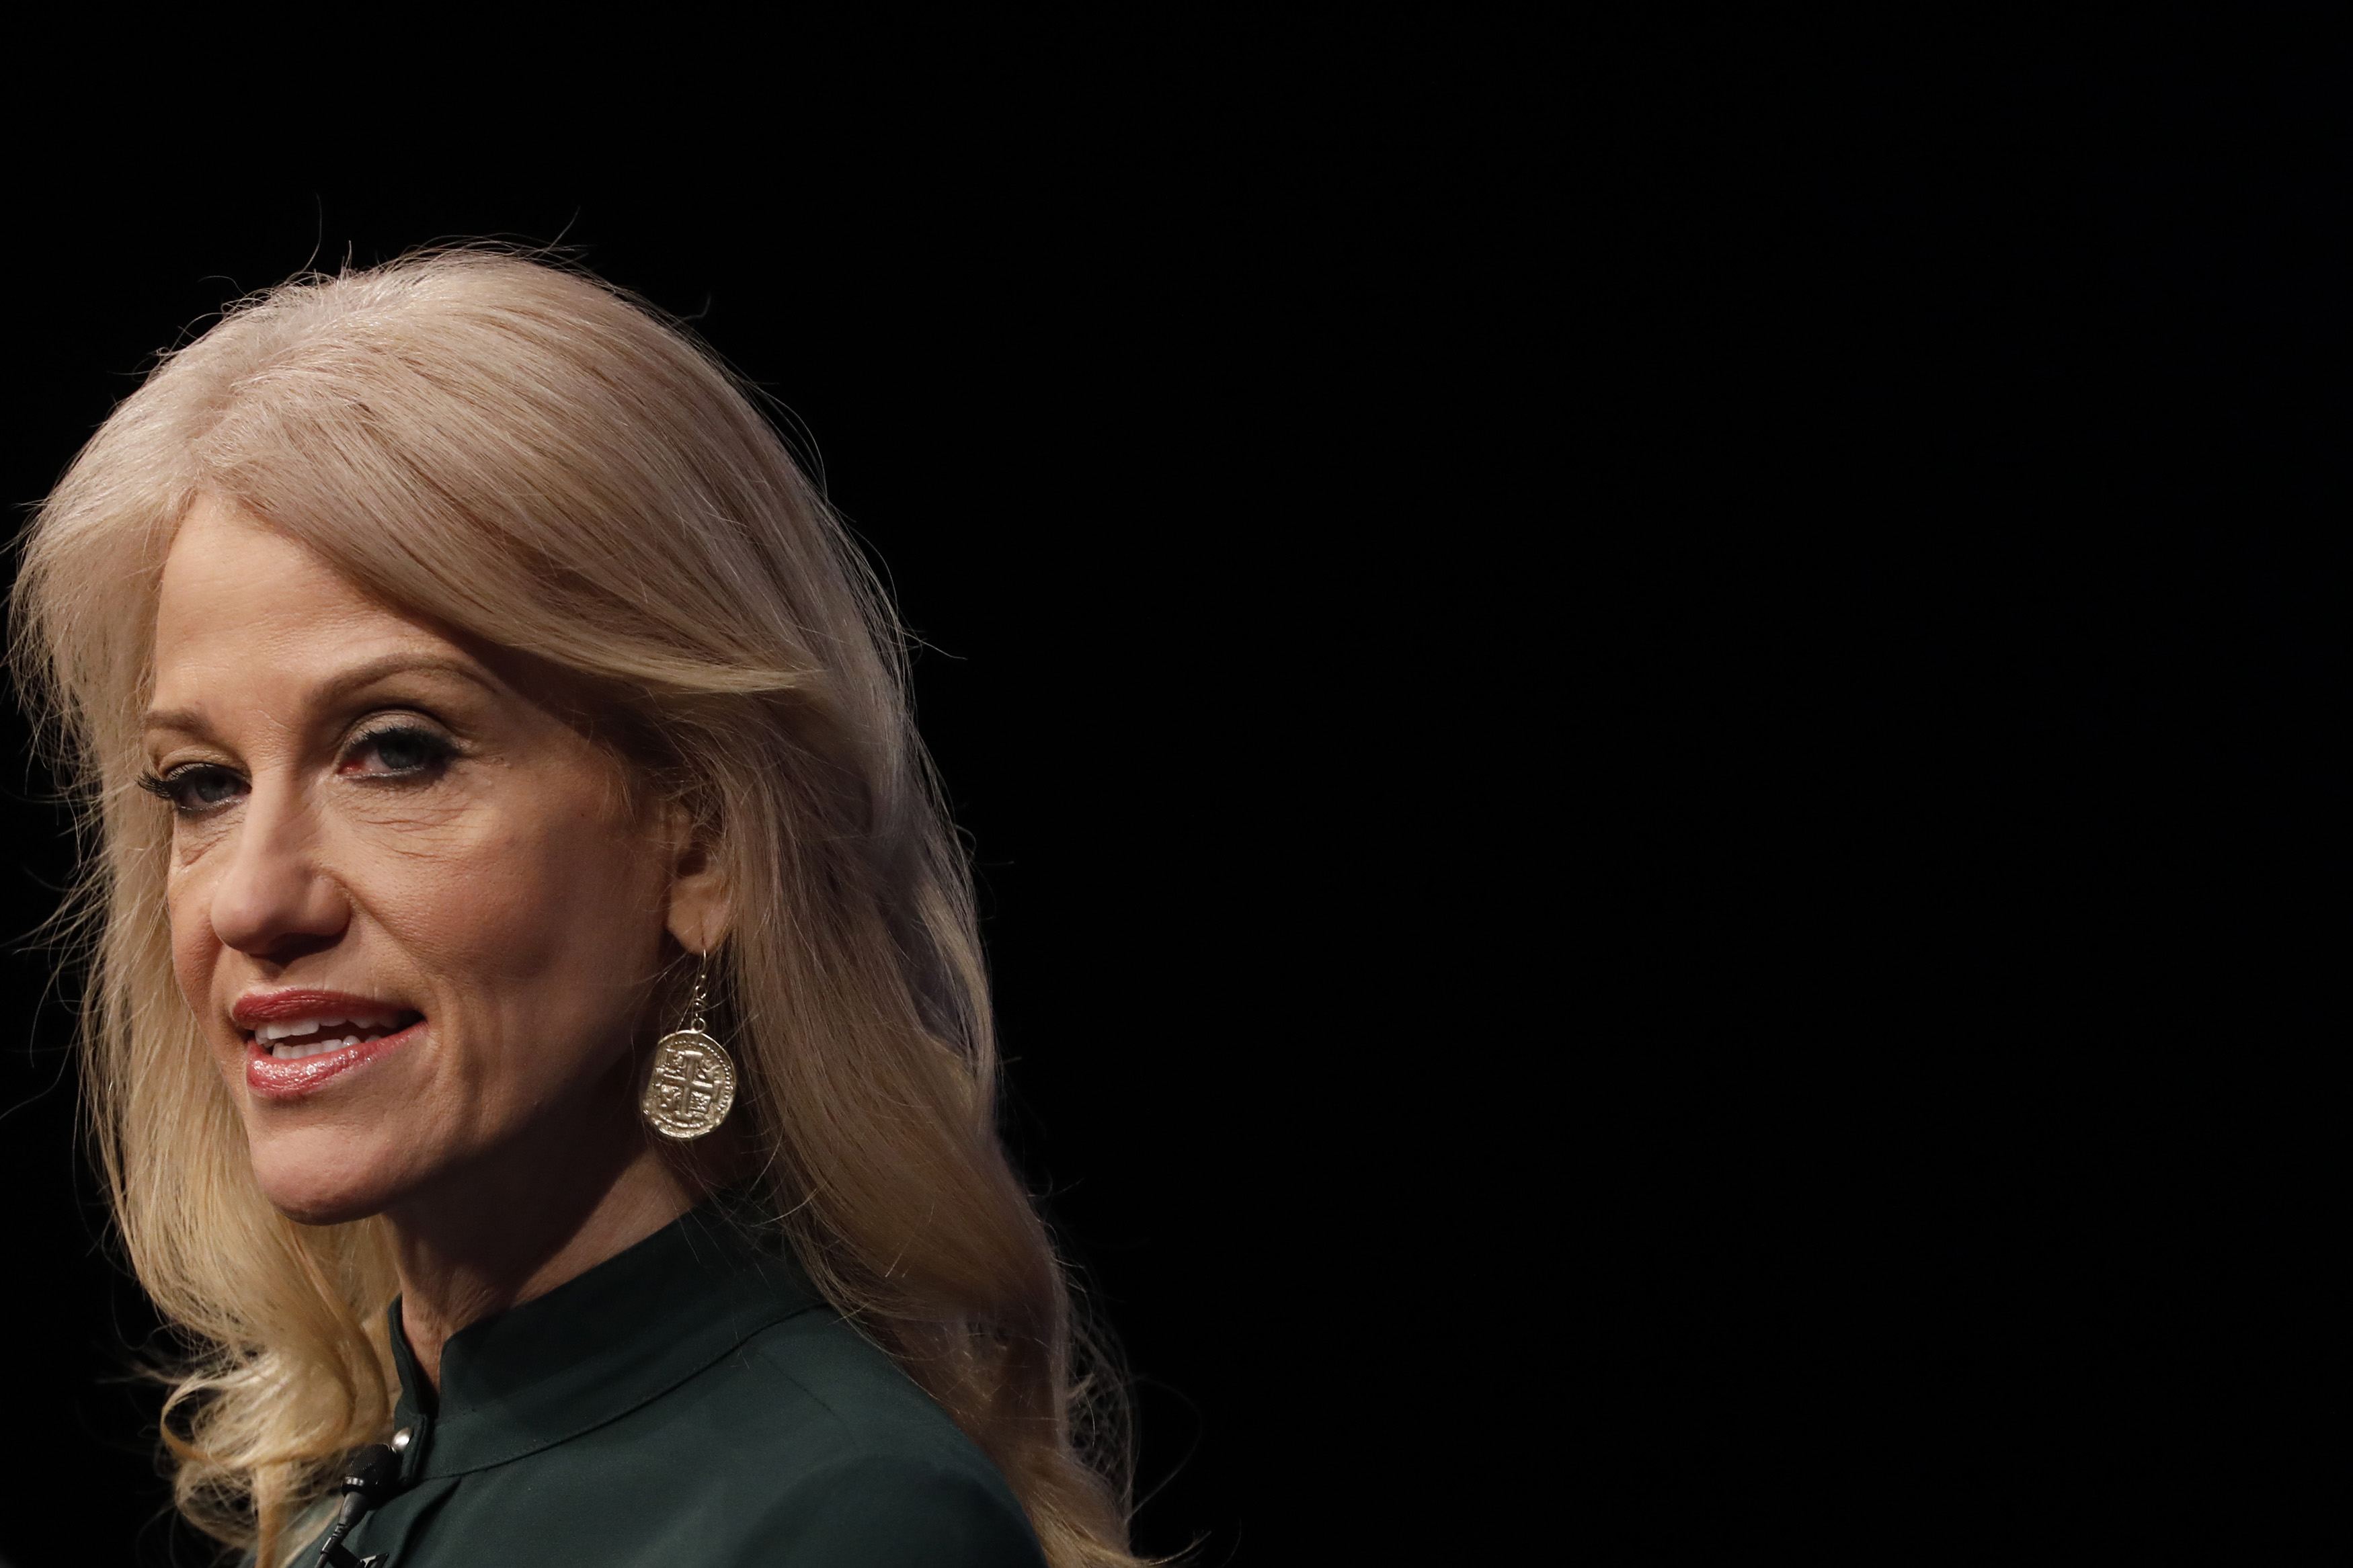 Leo appears to have used his network to pay between $1 million and $5 million to Trump adviser Kellyanne Conway (pictured) for the sale of her business while she was advocating for Leo’s list of preferred court nominees.